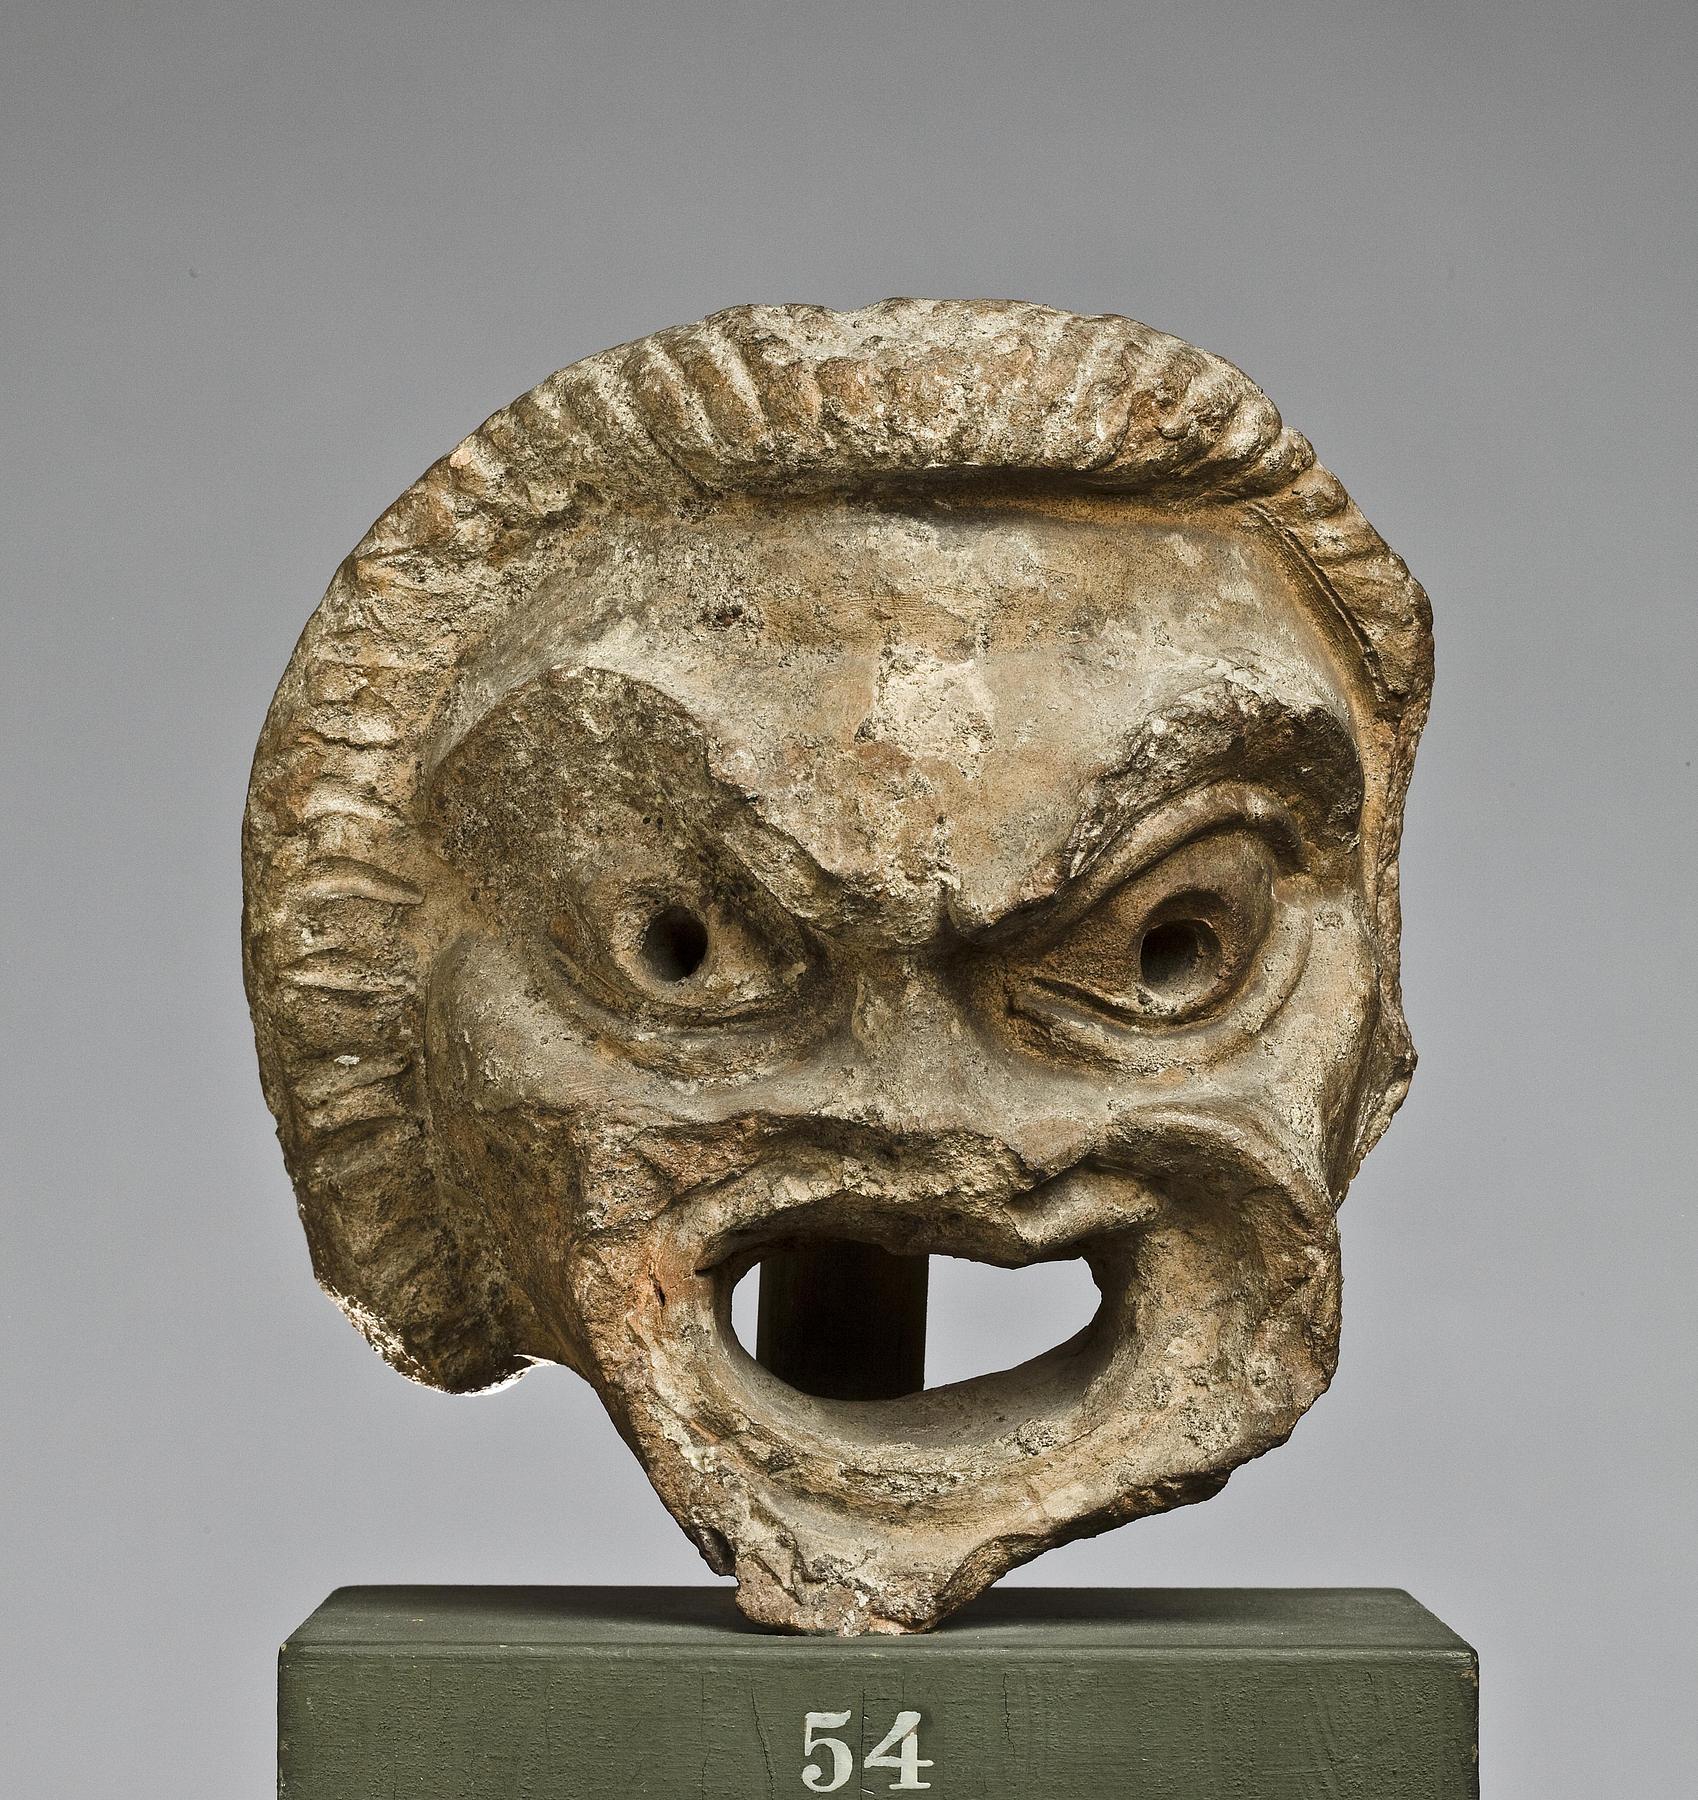 Water spout in the shape of a theatre mask, H1054